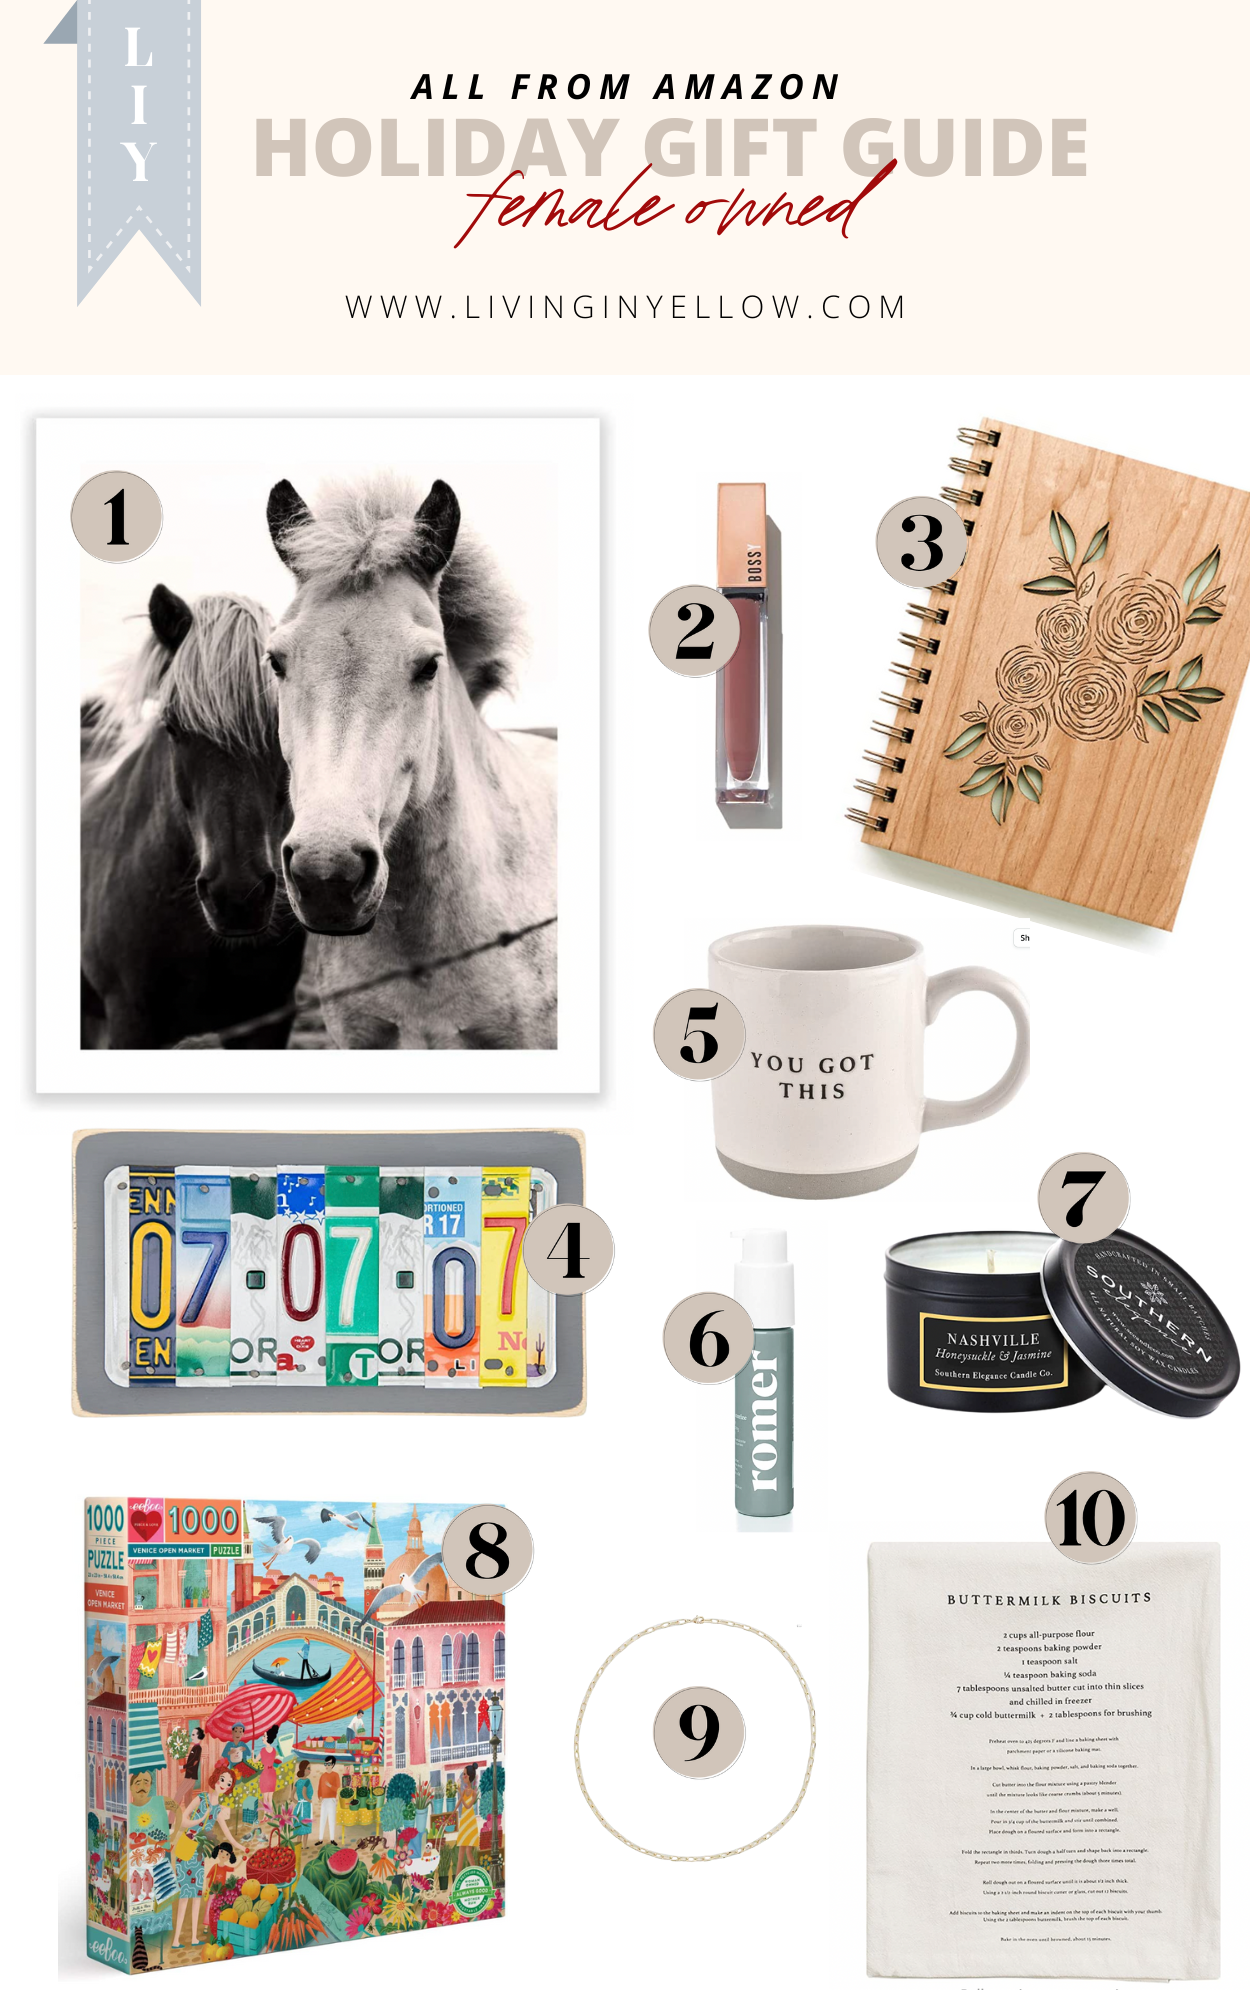 HOLIDAY GIFT GUIDES FOR HIM + HER FROM STORE5a - The Dandy Liar